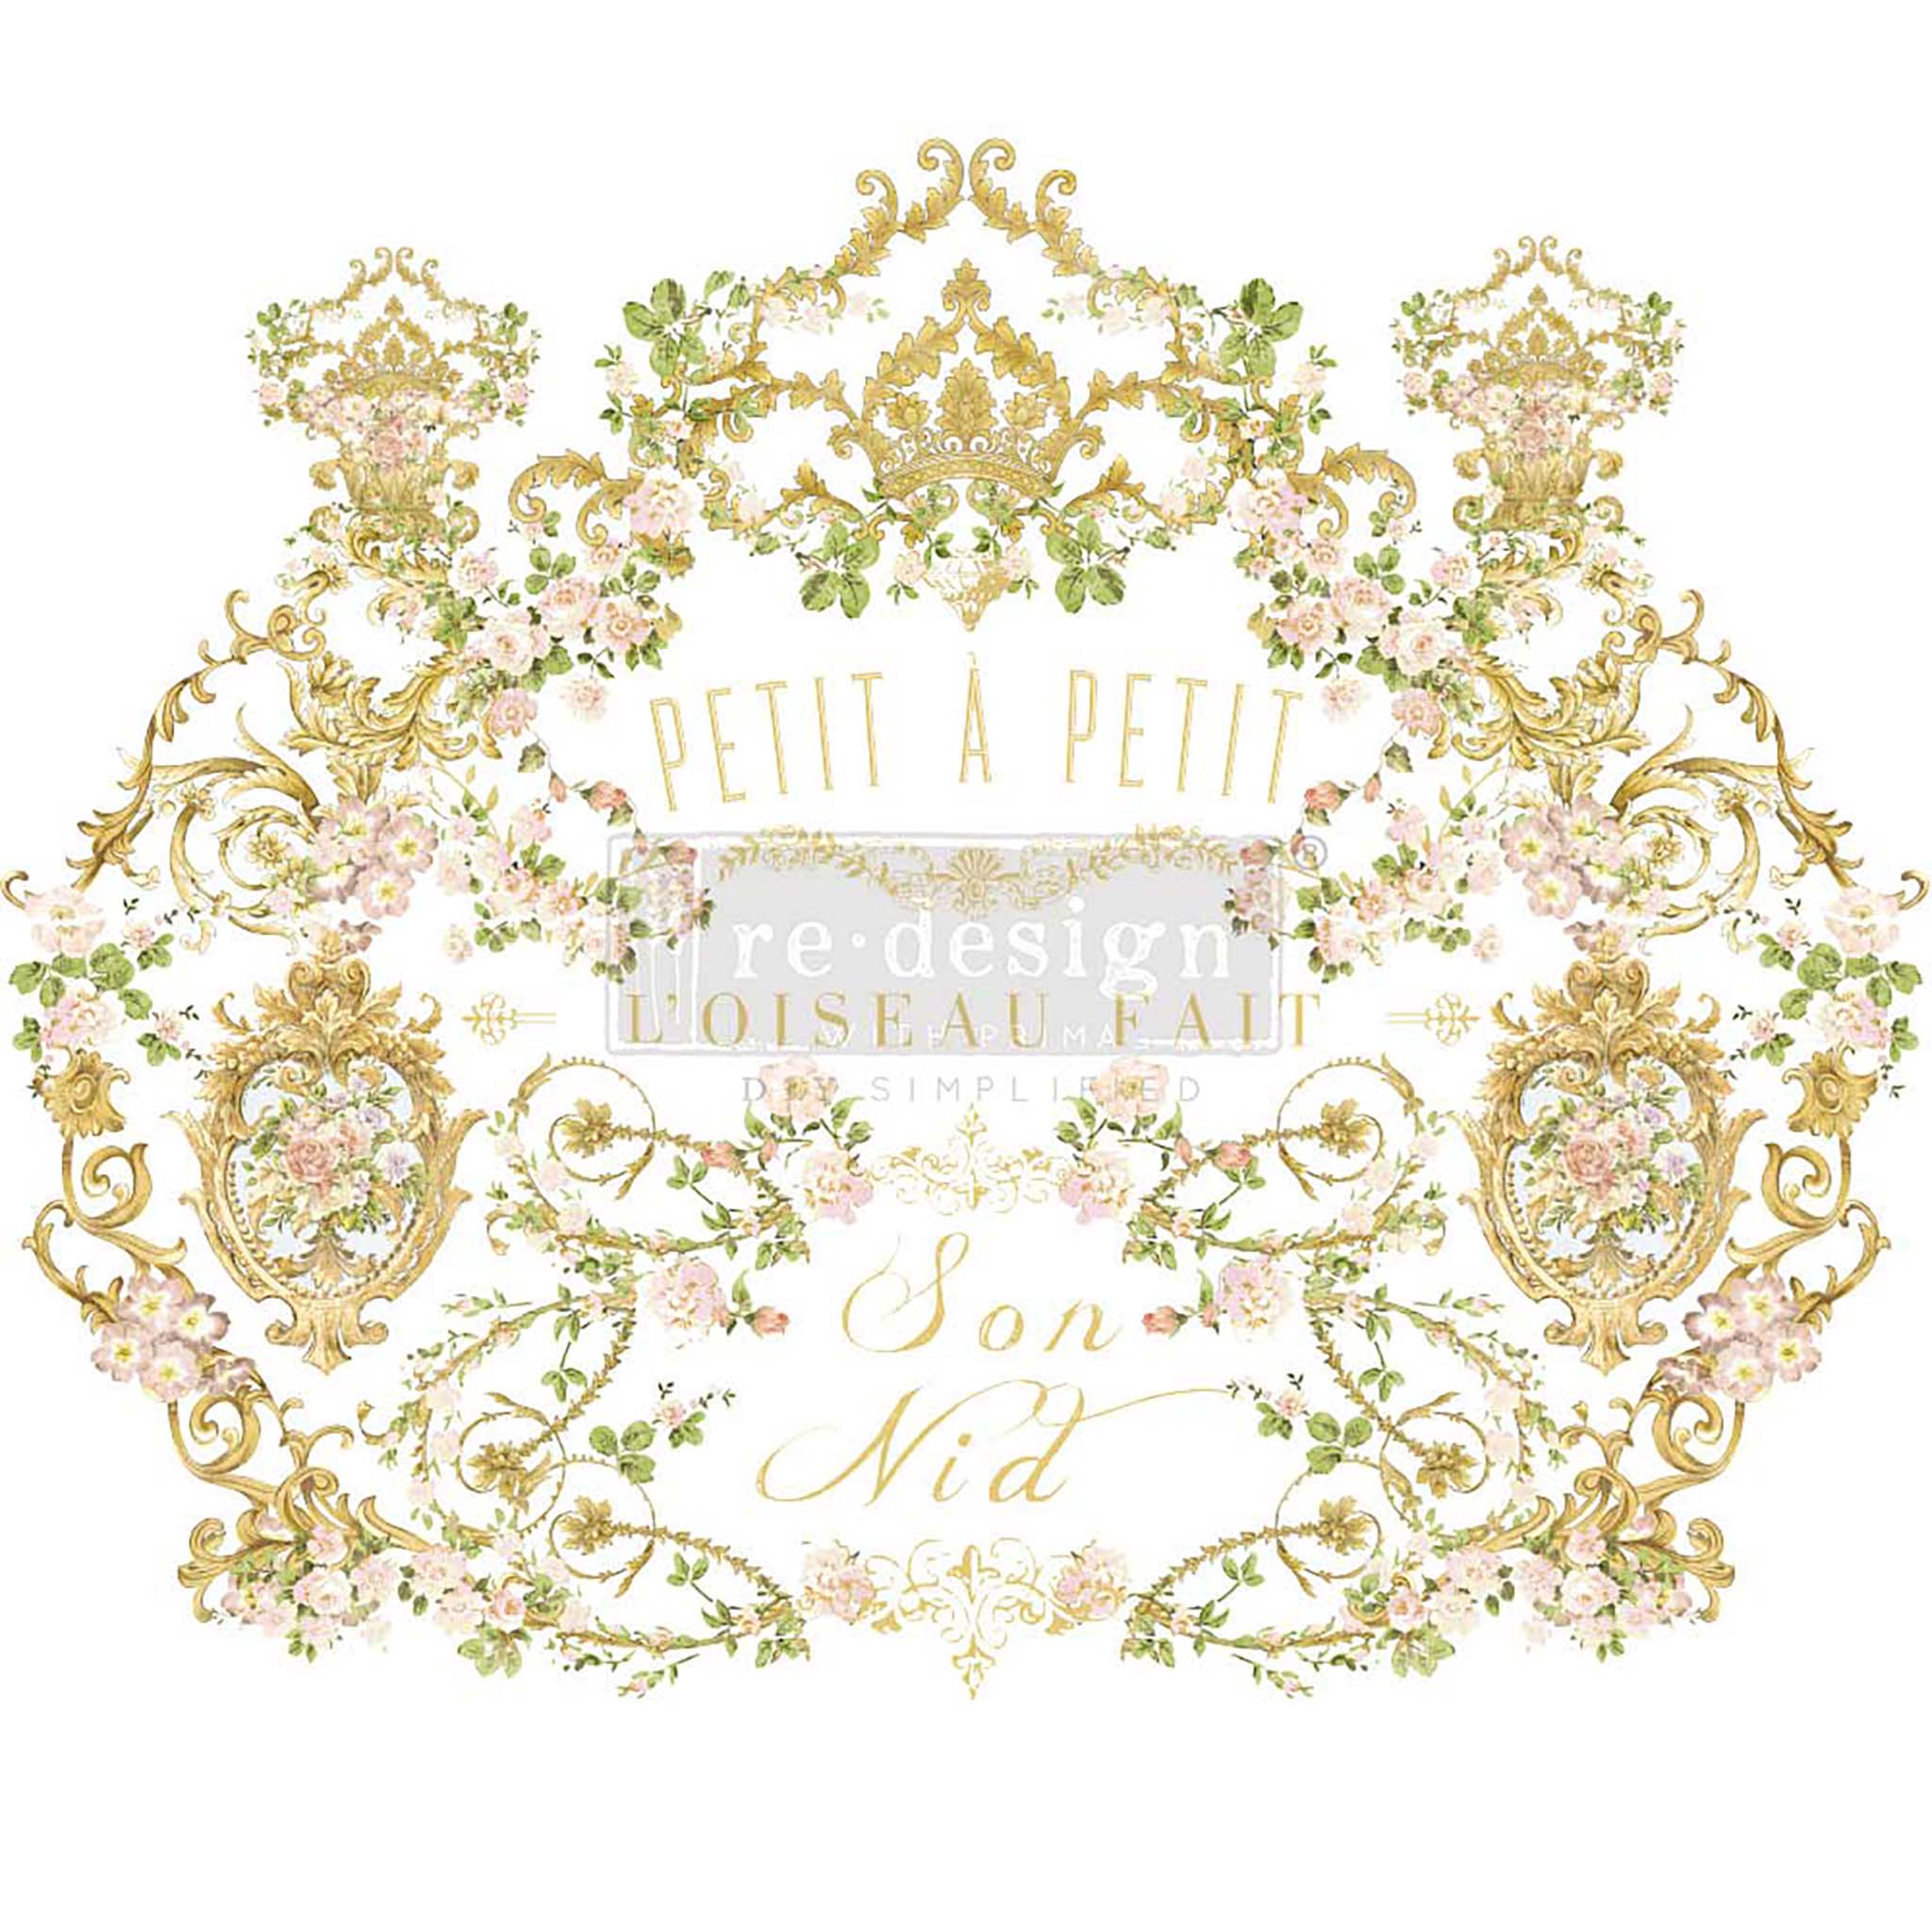 Rub-on transfer design of a delicate French gold and green vintage royal sign.